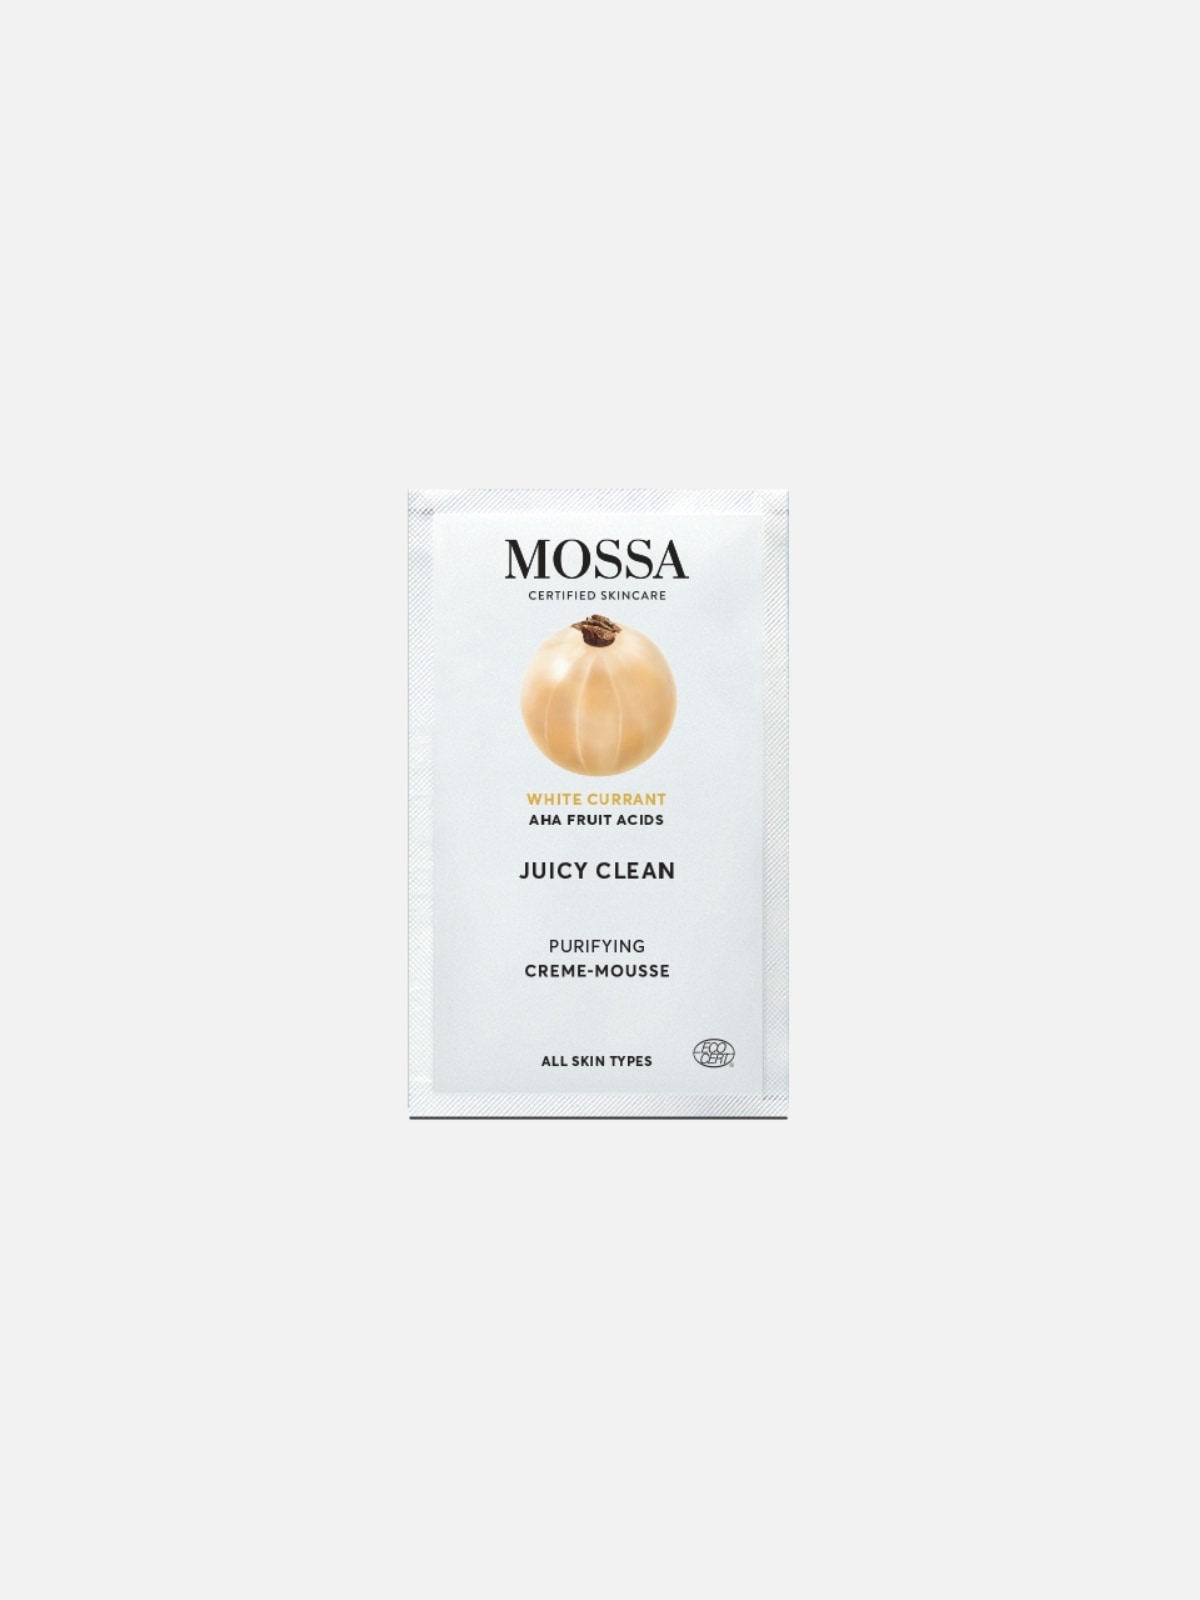 Mossa - Juicy Clean Purifying Creme-Mousse